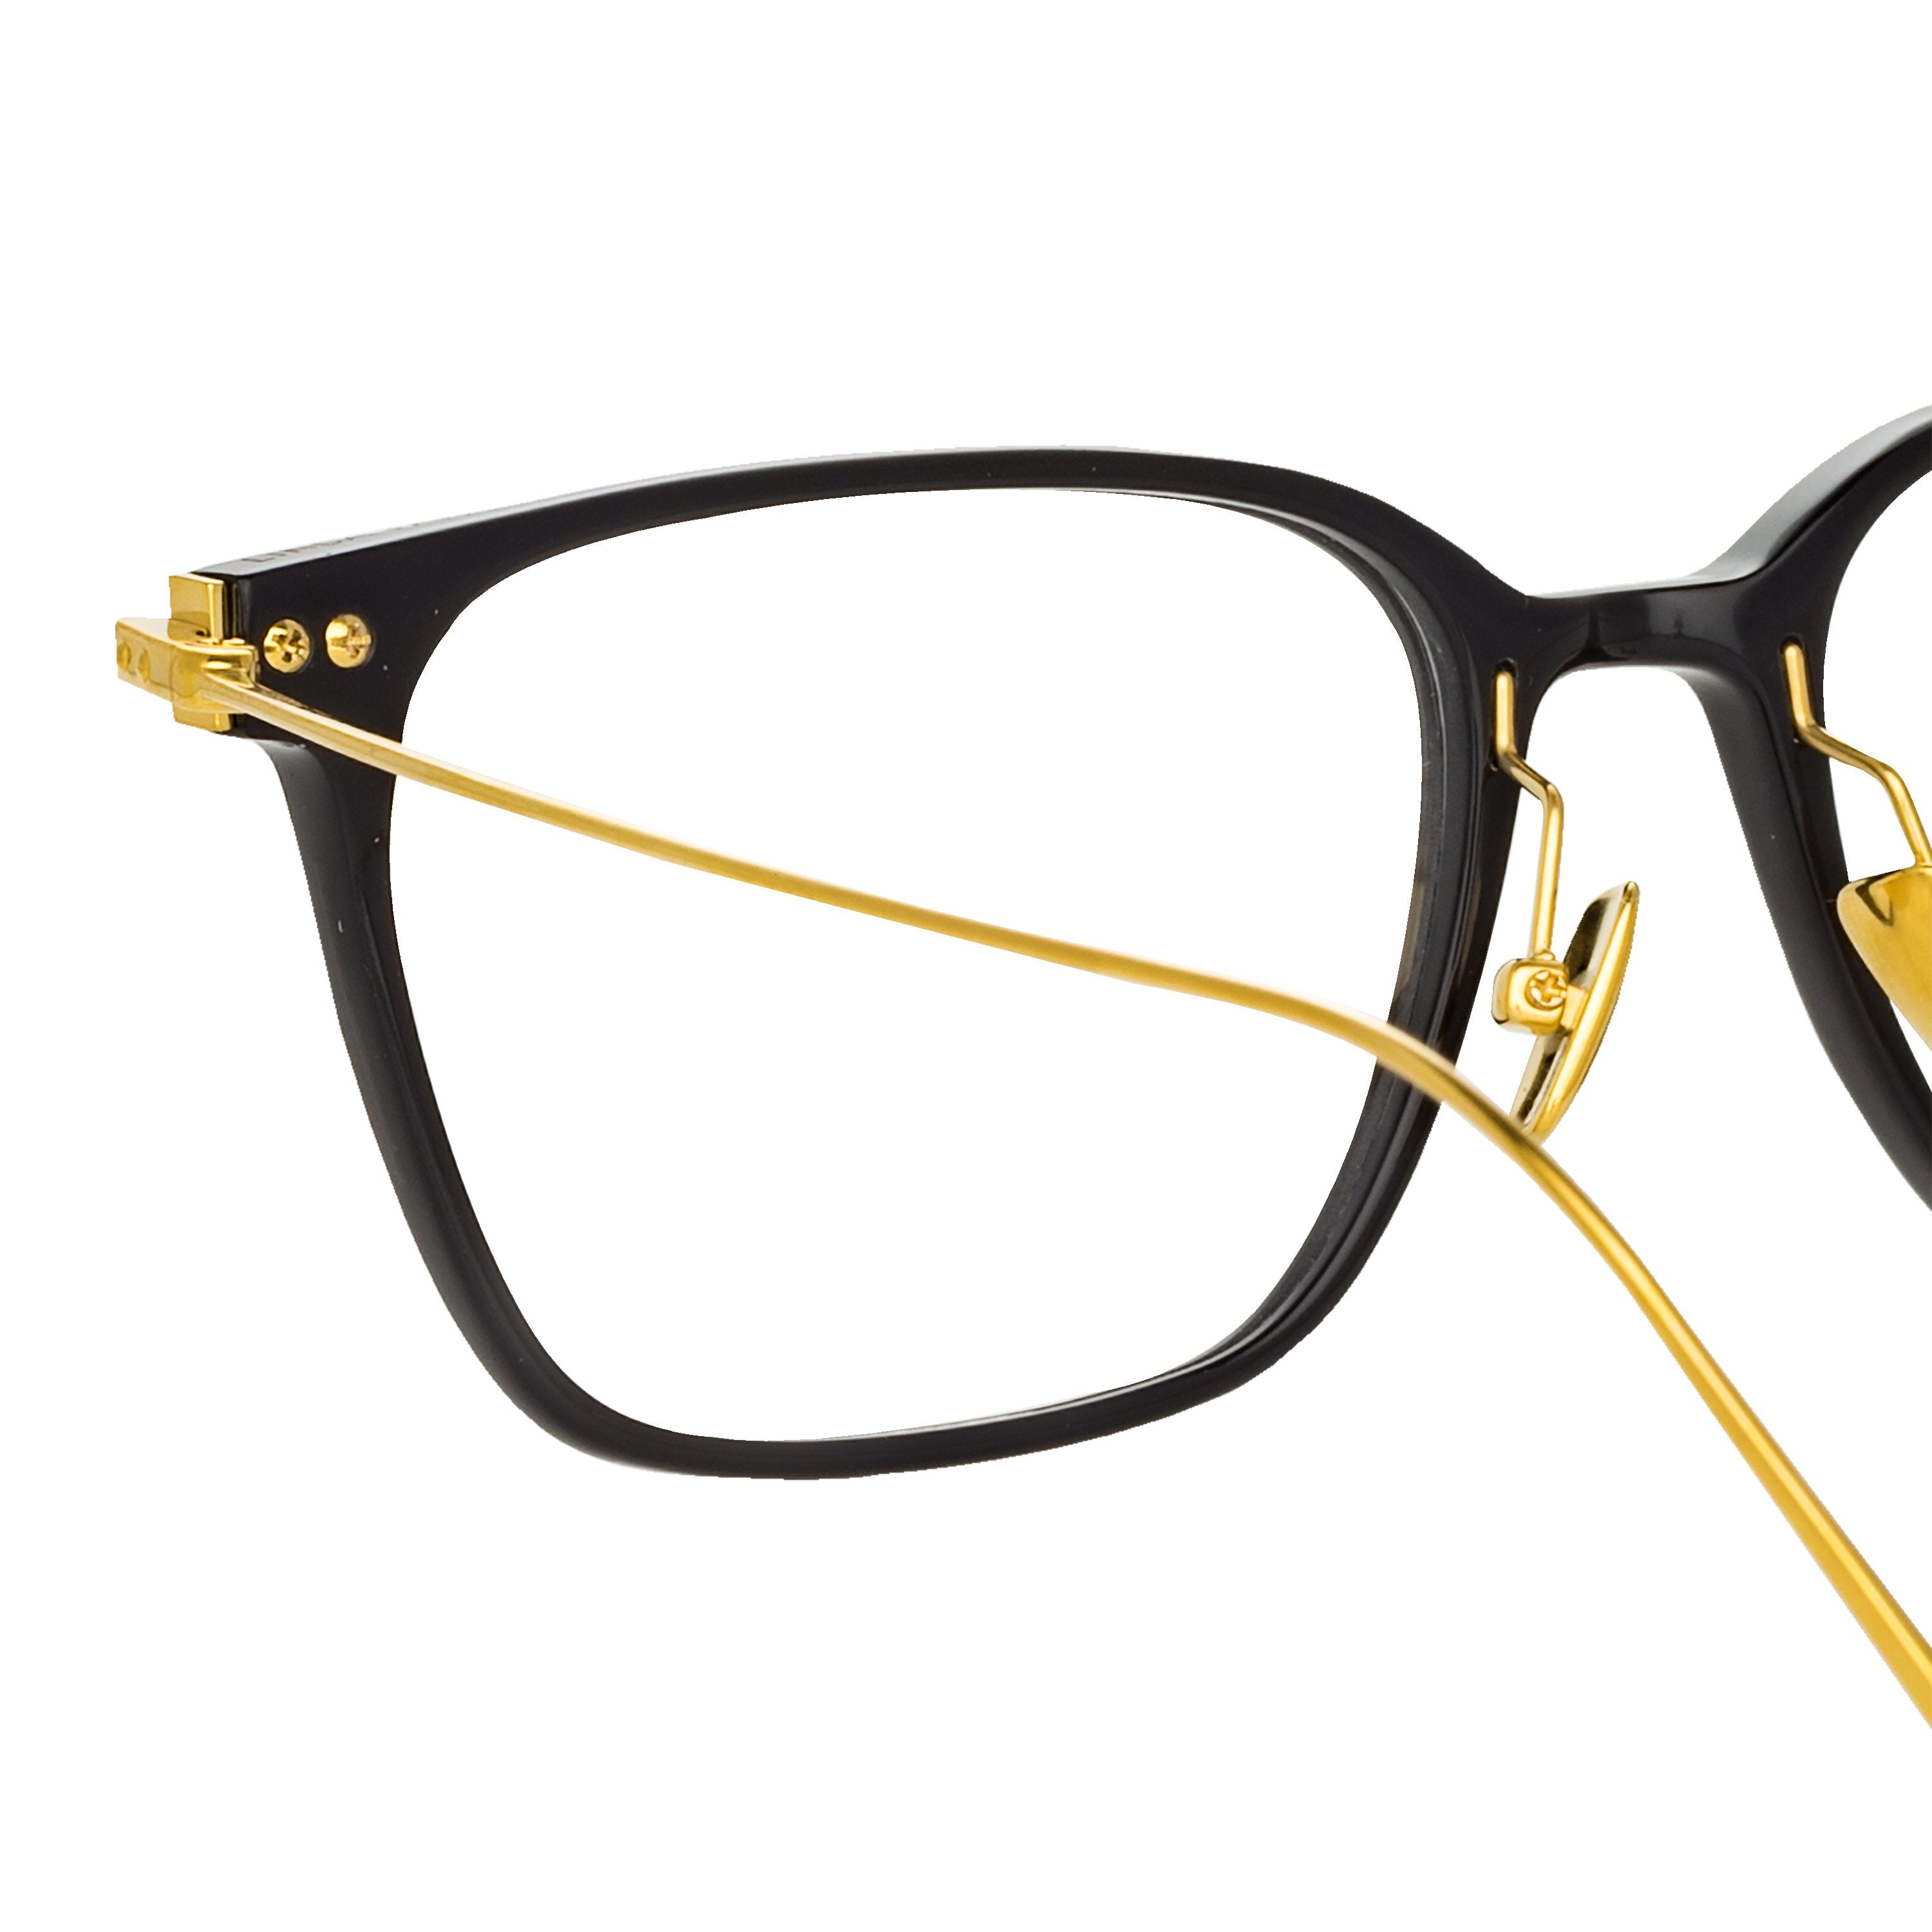 Color_LF37C1OPT - Gehry Rectangular Optical Frame in Yellow Gold and Black